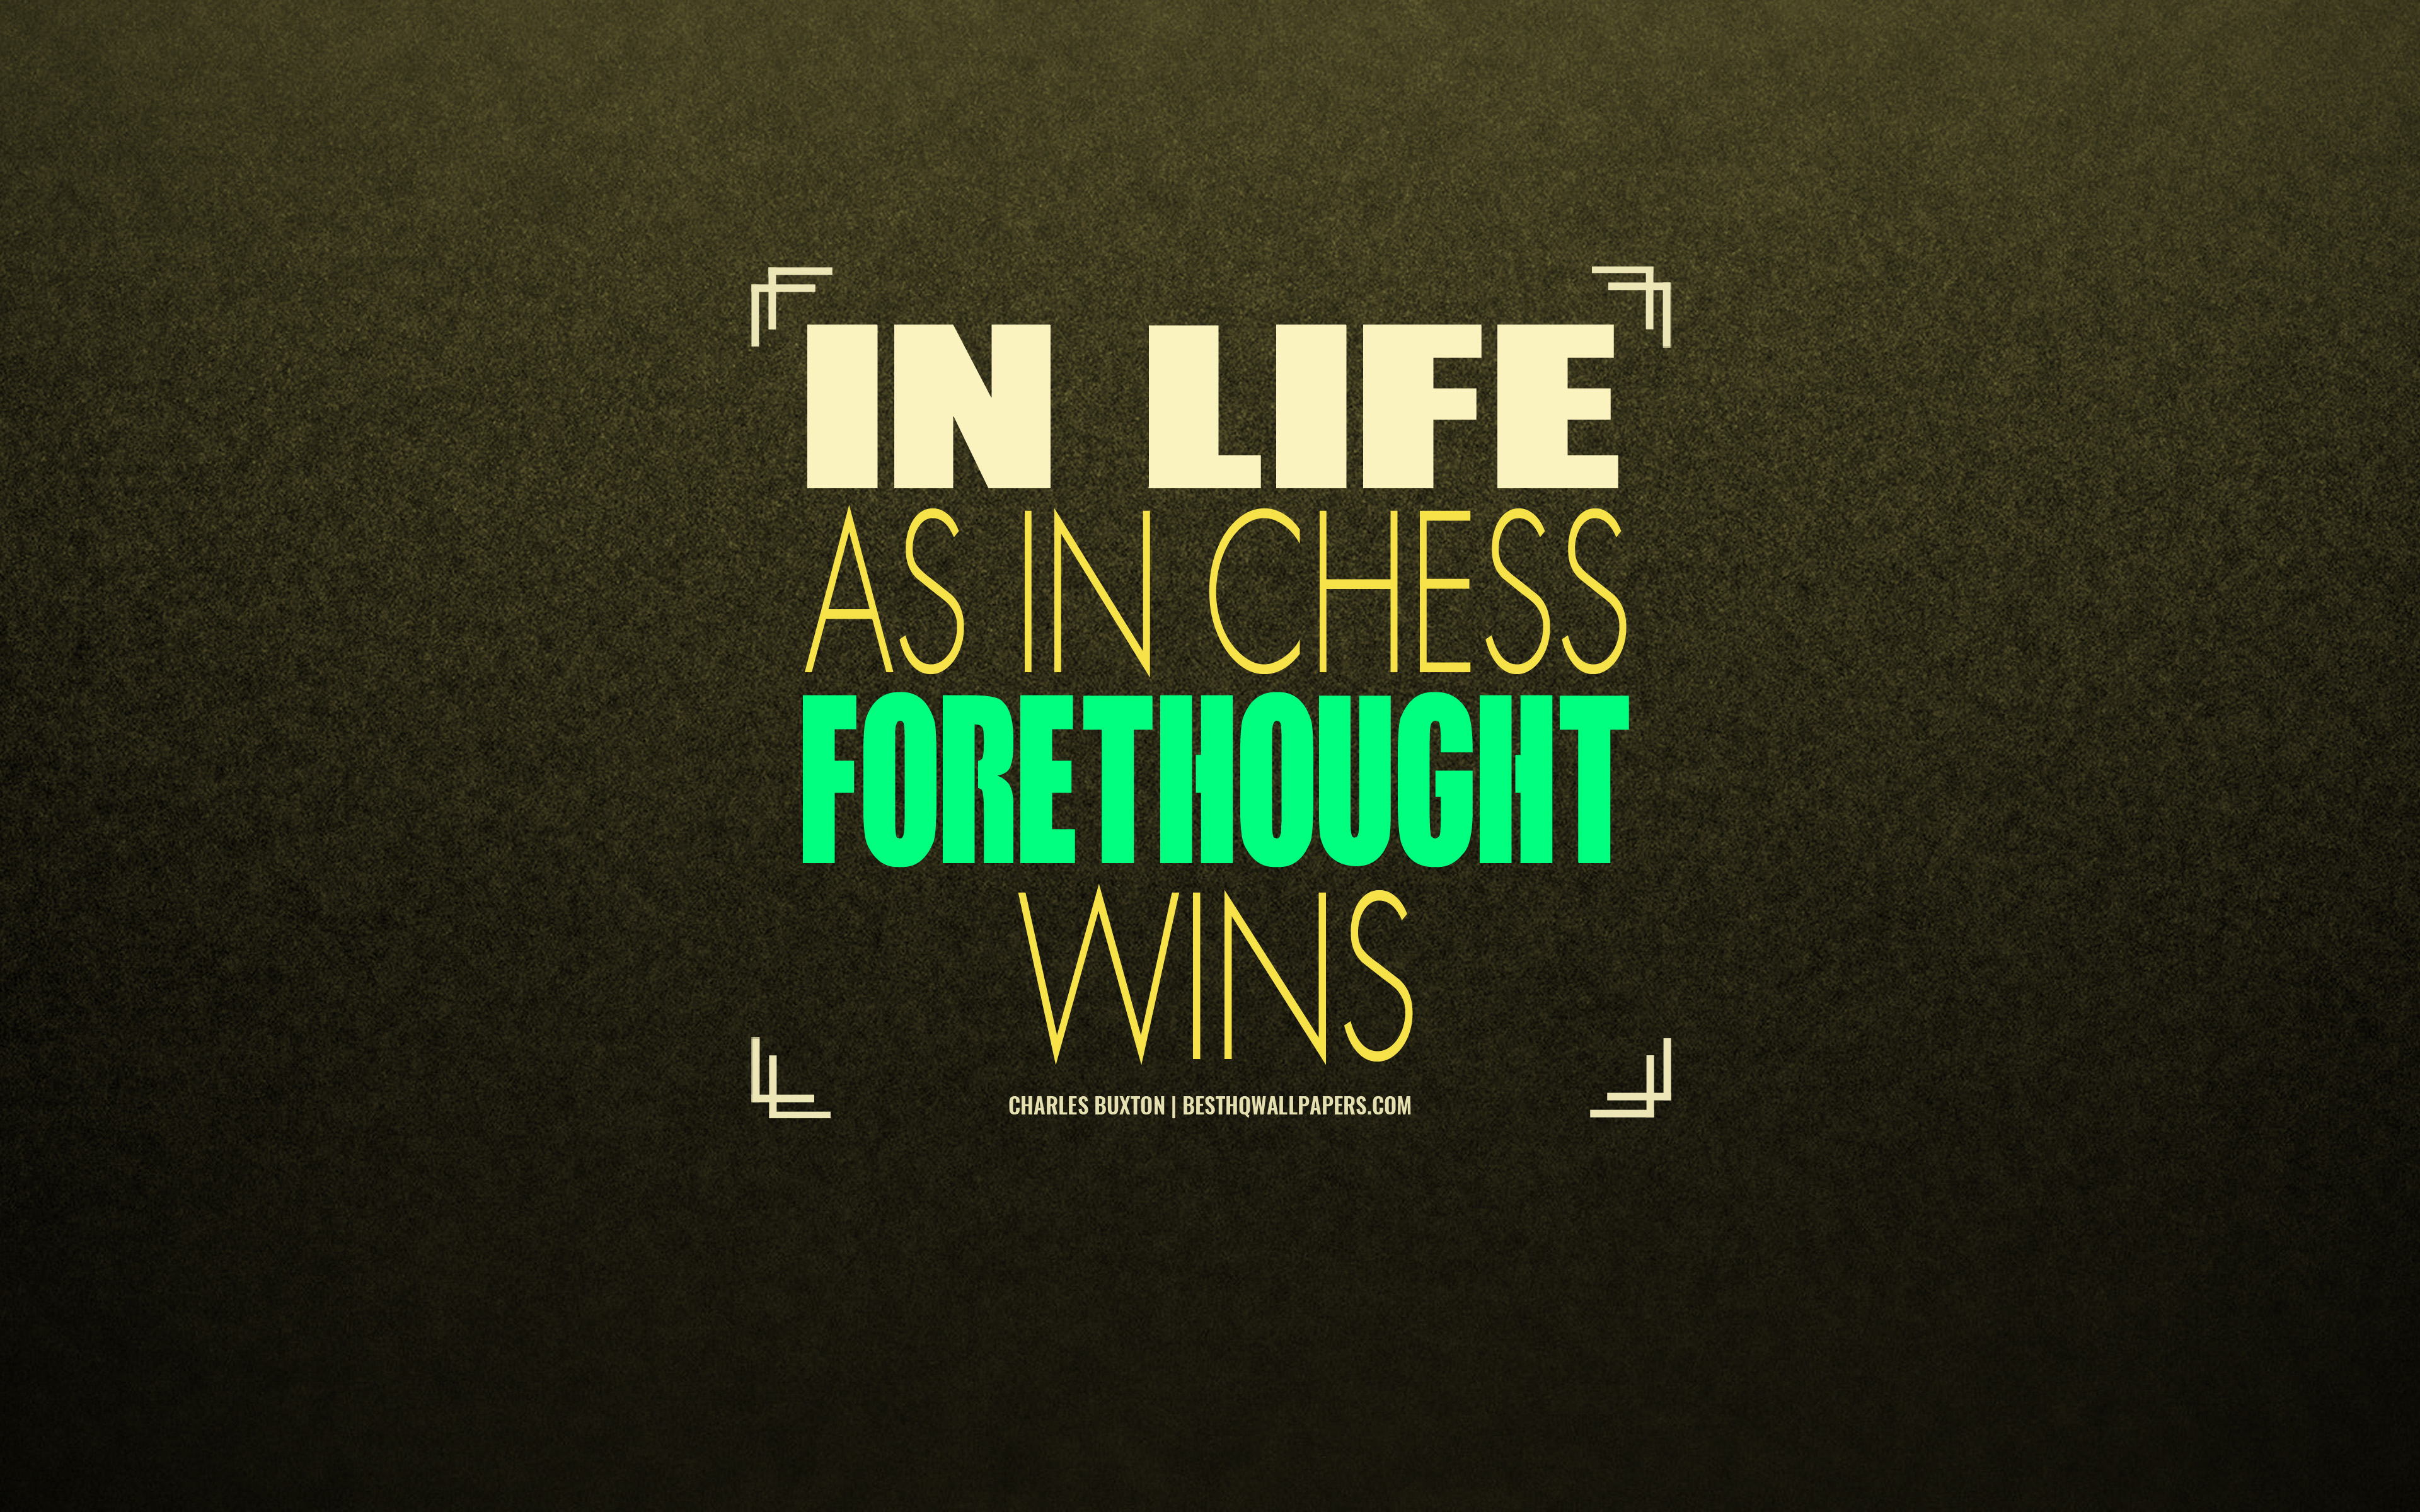 Download wallpaper In life as in chess forethought wins, Charles Buxton, quotes about life, creative art, motivation, inspiration for desktop with resolution 3840x2400. High Quality HD picture wallpaper